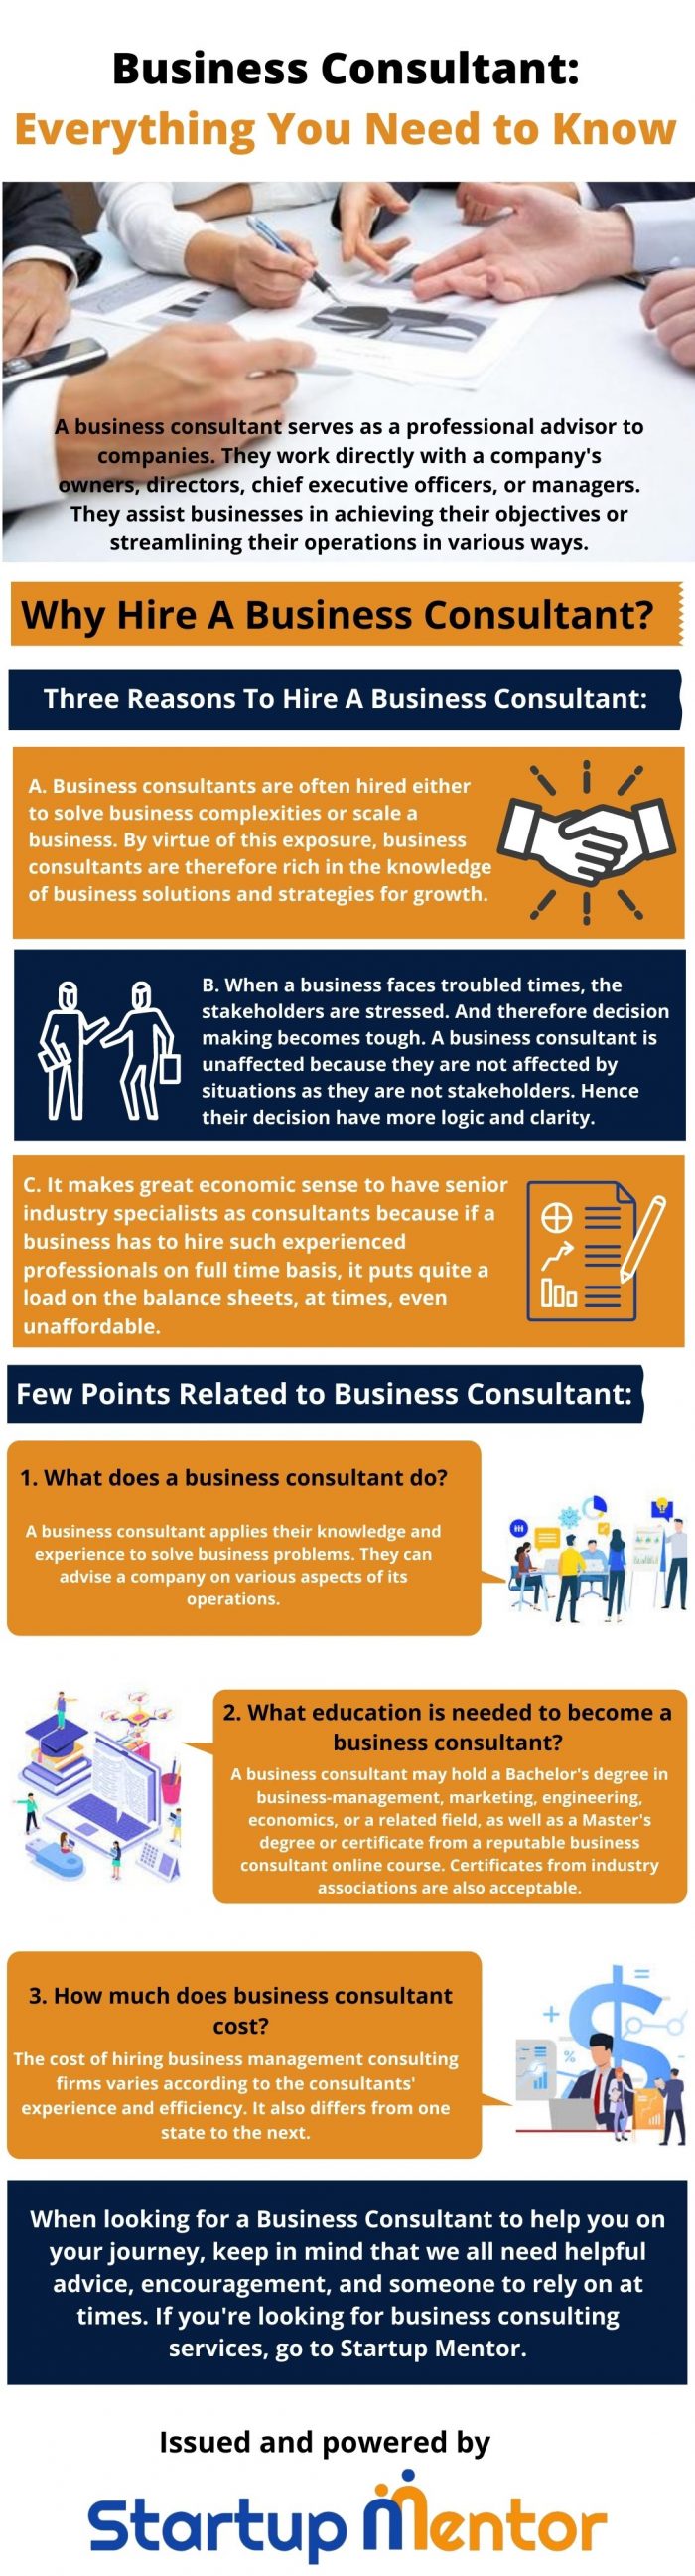 Business Consultant: Everything You Need to Know